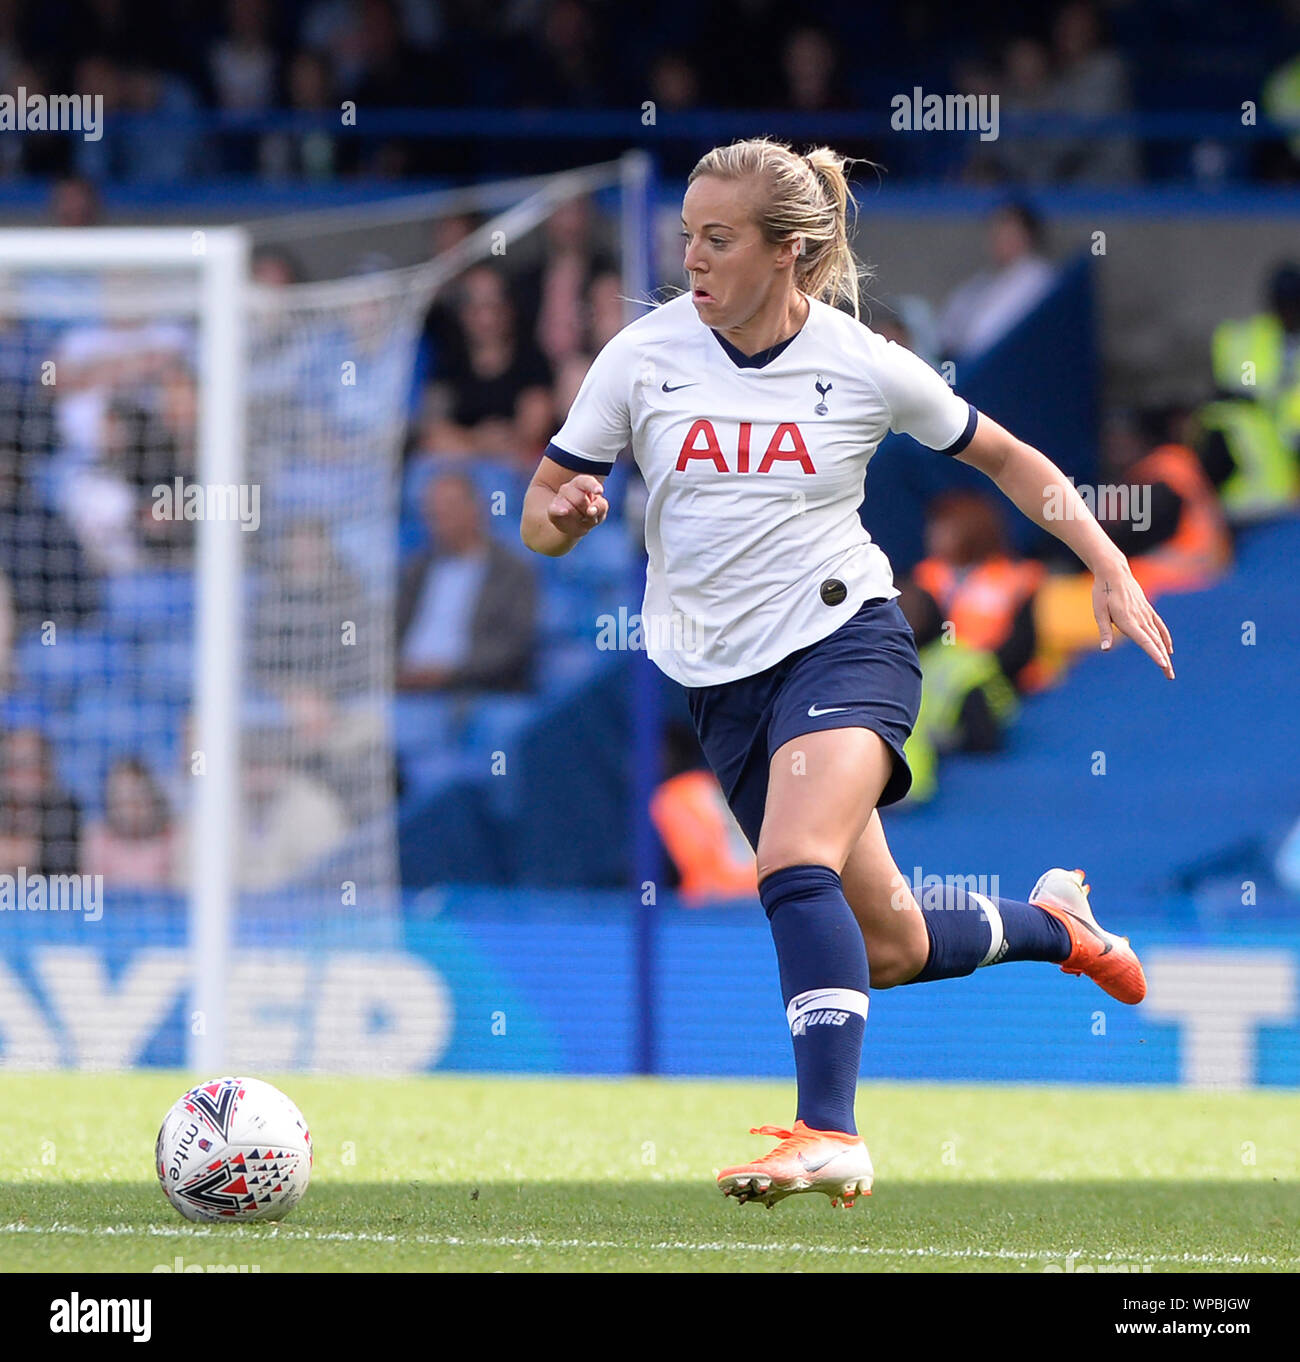 Fulham, UK. 08th Sep, 2019. Gemma Davison of Tottenham Hotspur Women in action during the Barclays WomenÕs Super League match between Chelsea Women and of Tottenham Hotspur Women at Stamford Bridge in London, UK - 8th September 2019 Credit: Action Foto Sport/Alamy Live News Stock Photo